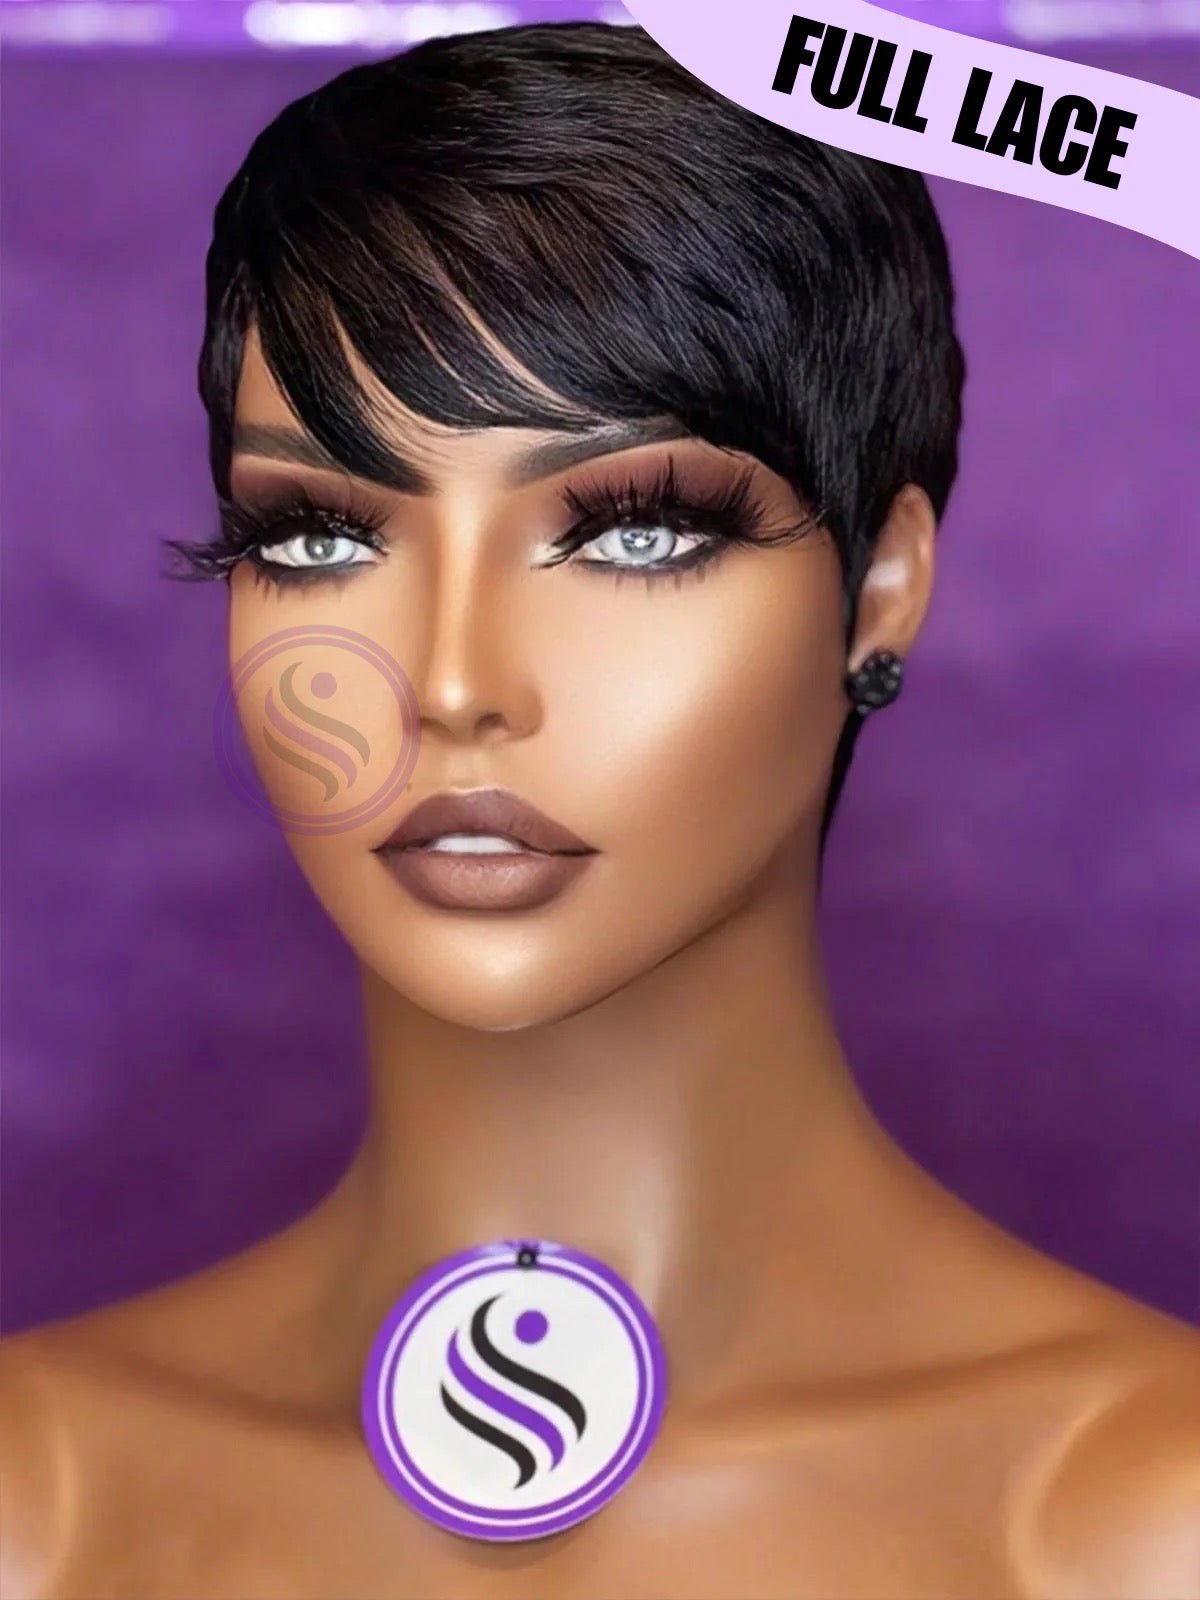 Miss Nia - Full Lace Pixie - Signature Specialty Salon